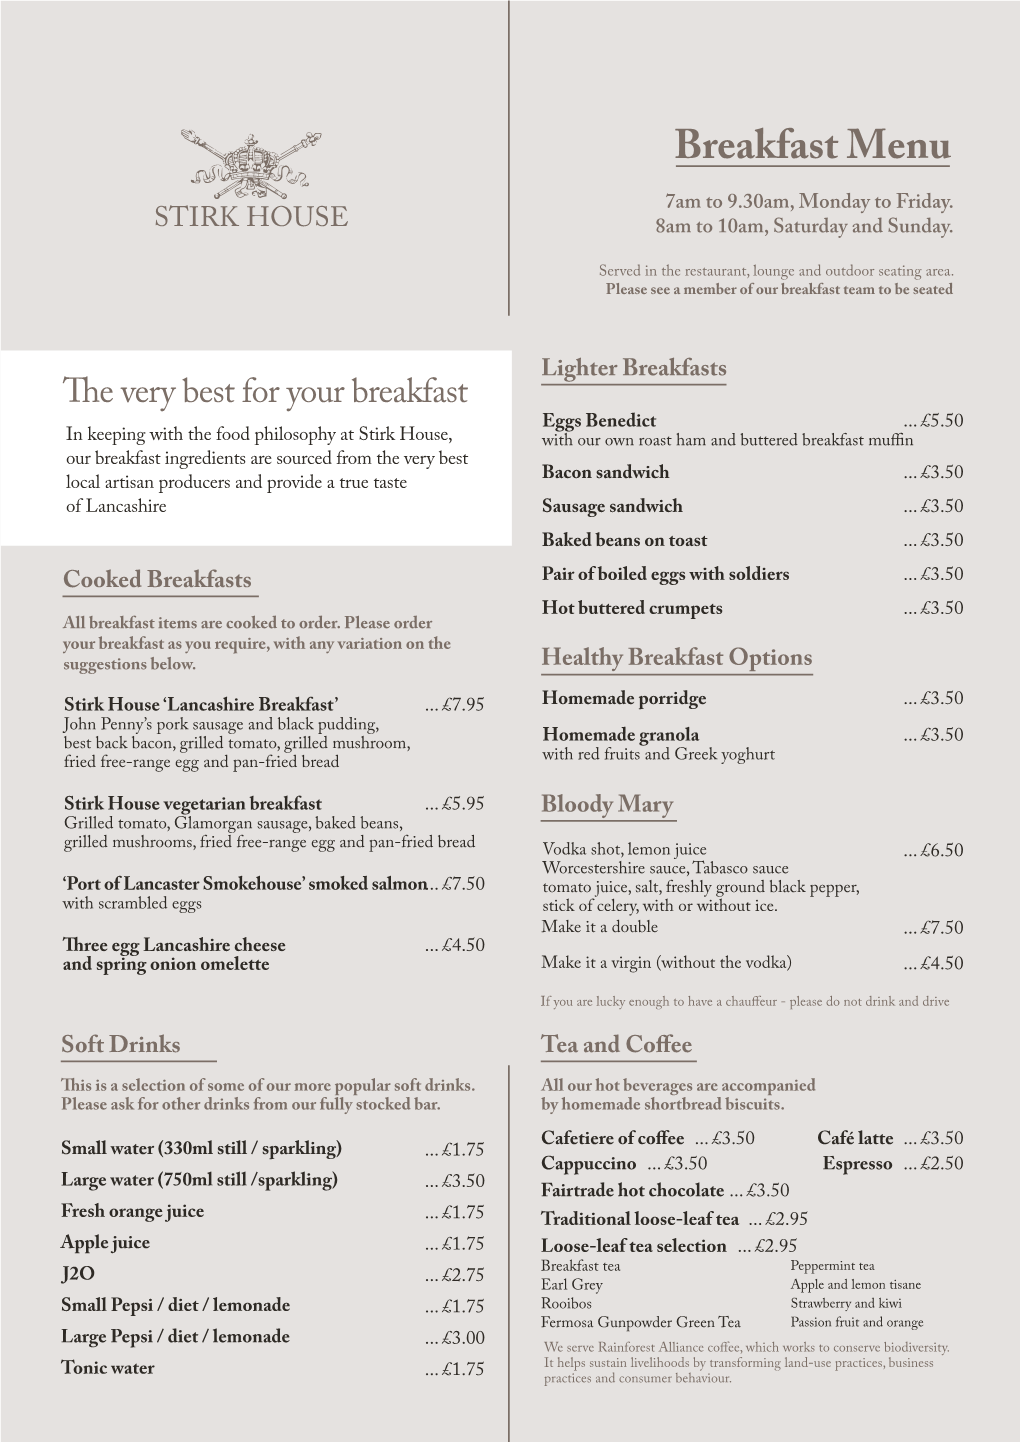 Breakfast Menu 7Am to 9.30Am, Monday to Friday